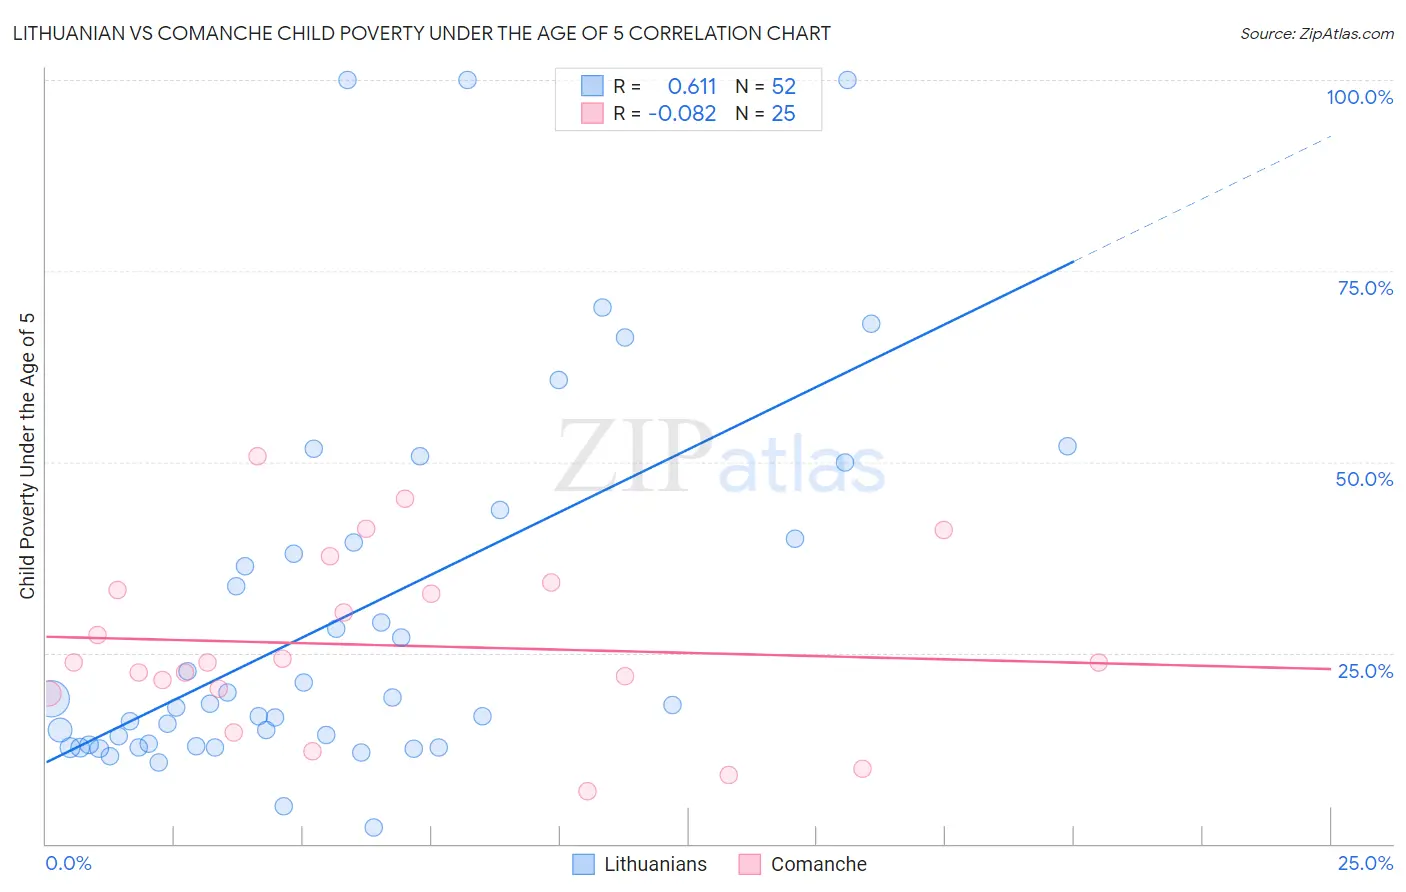 Lithuanian vs Comanche Child Poverty Under the Age of 5